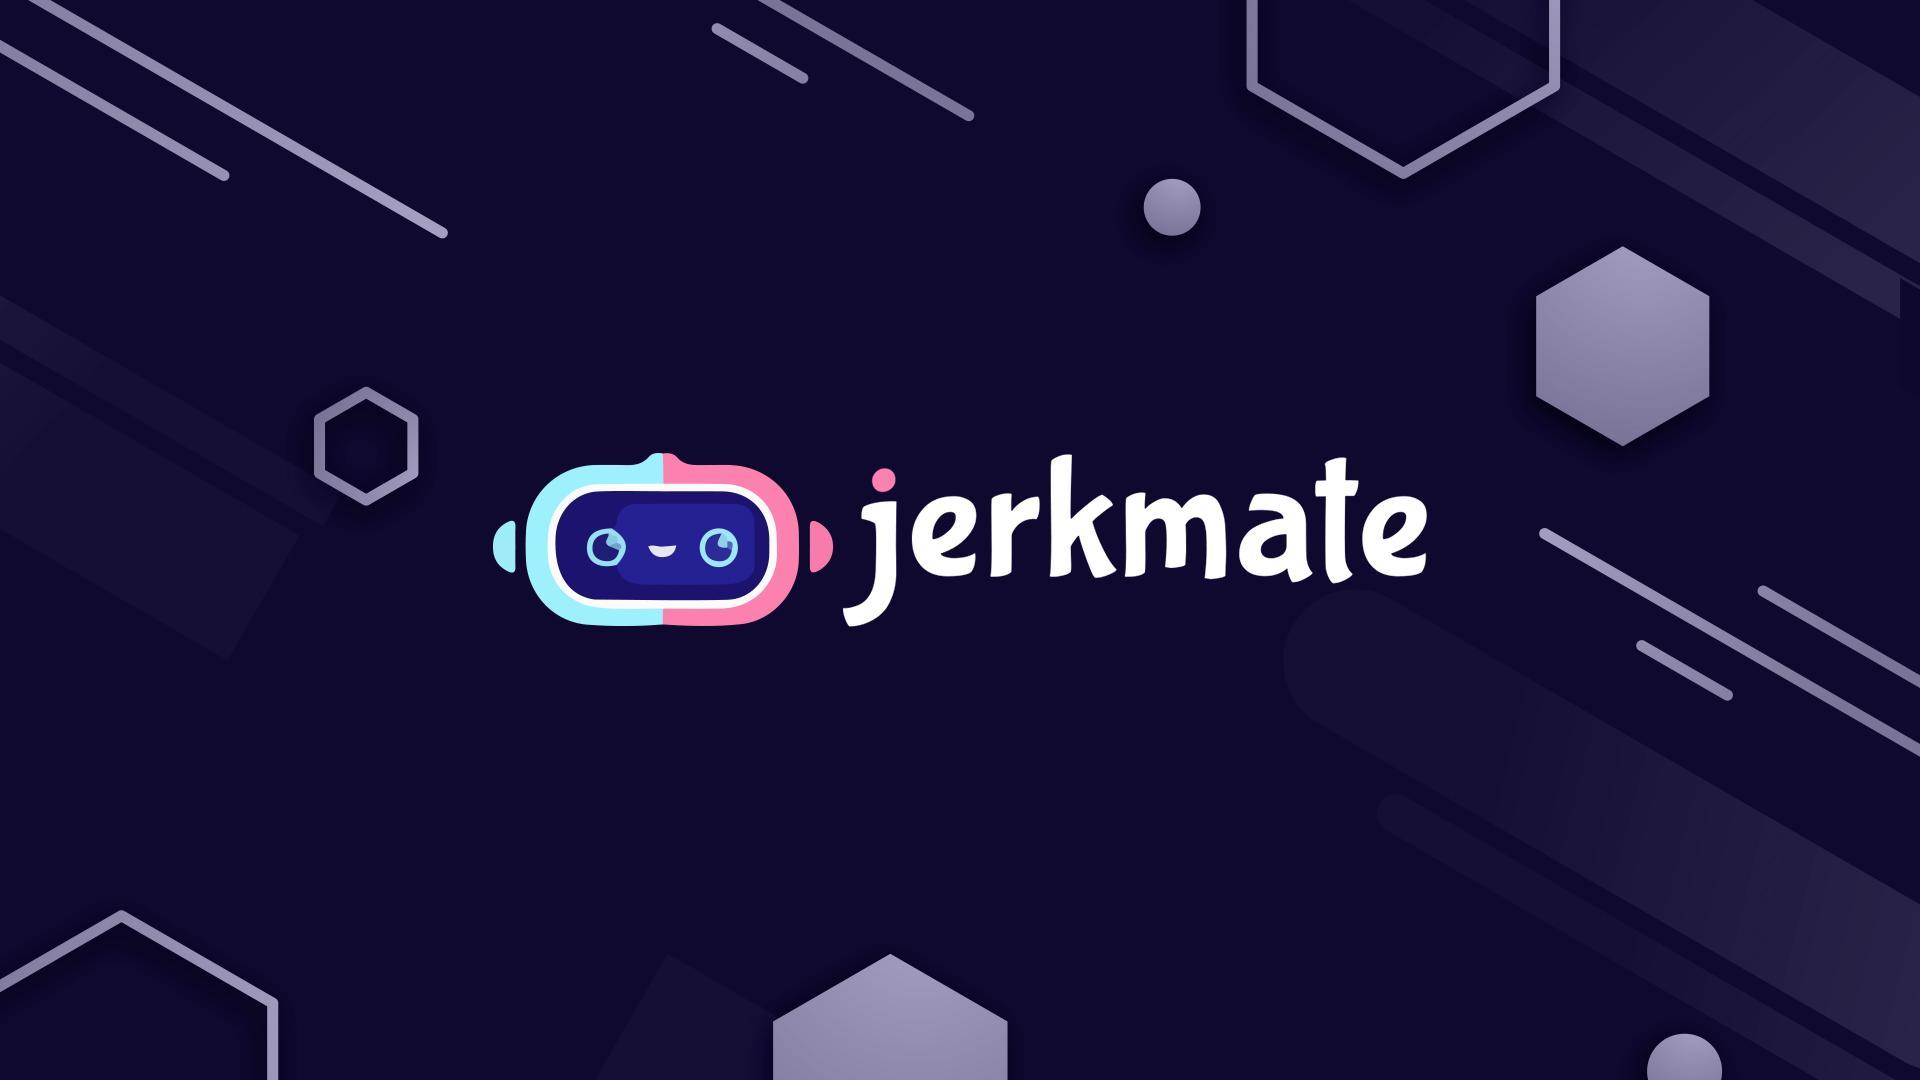 How to Make Things Interesting With Jerkmate?